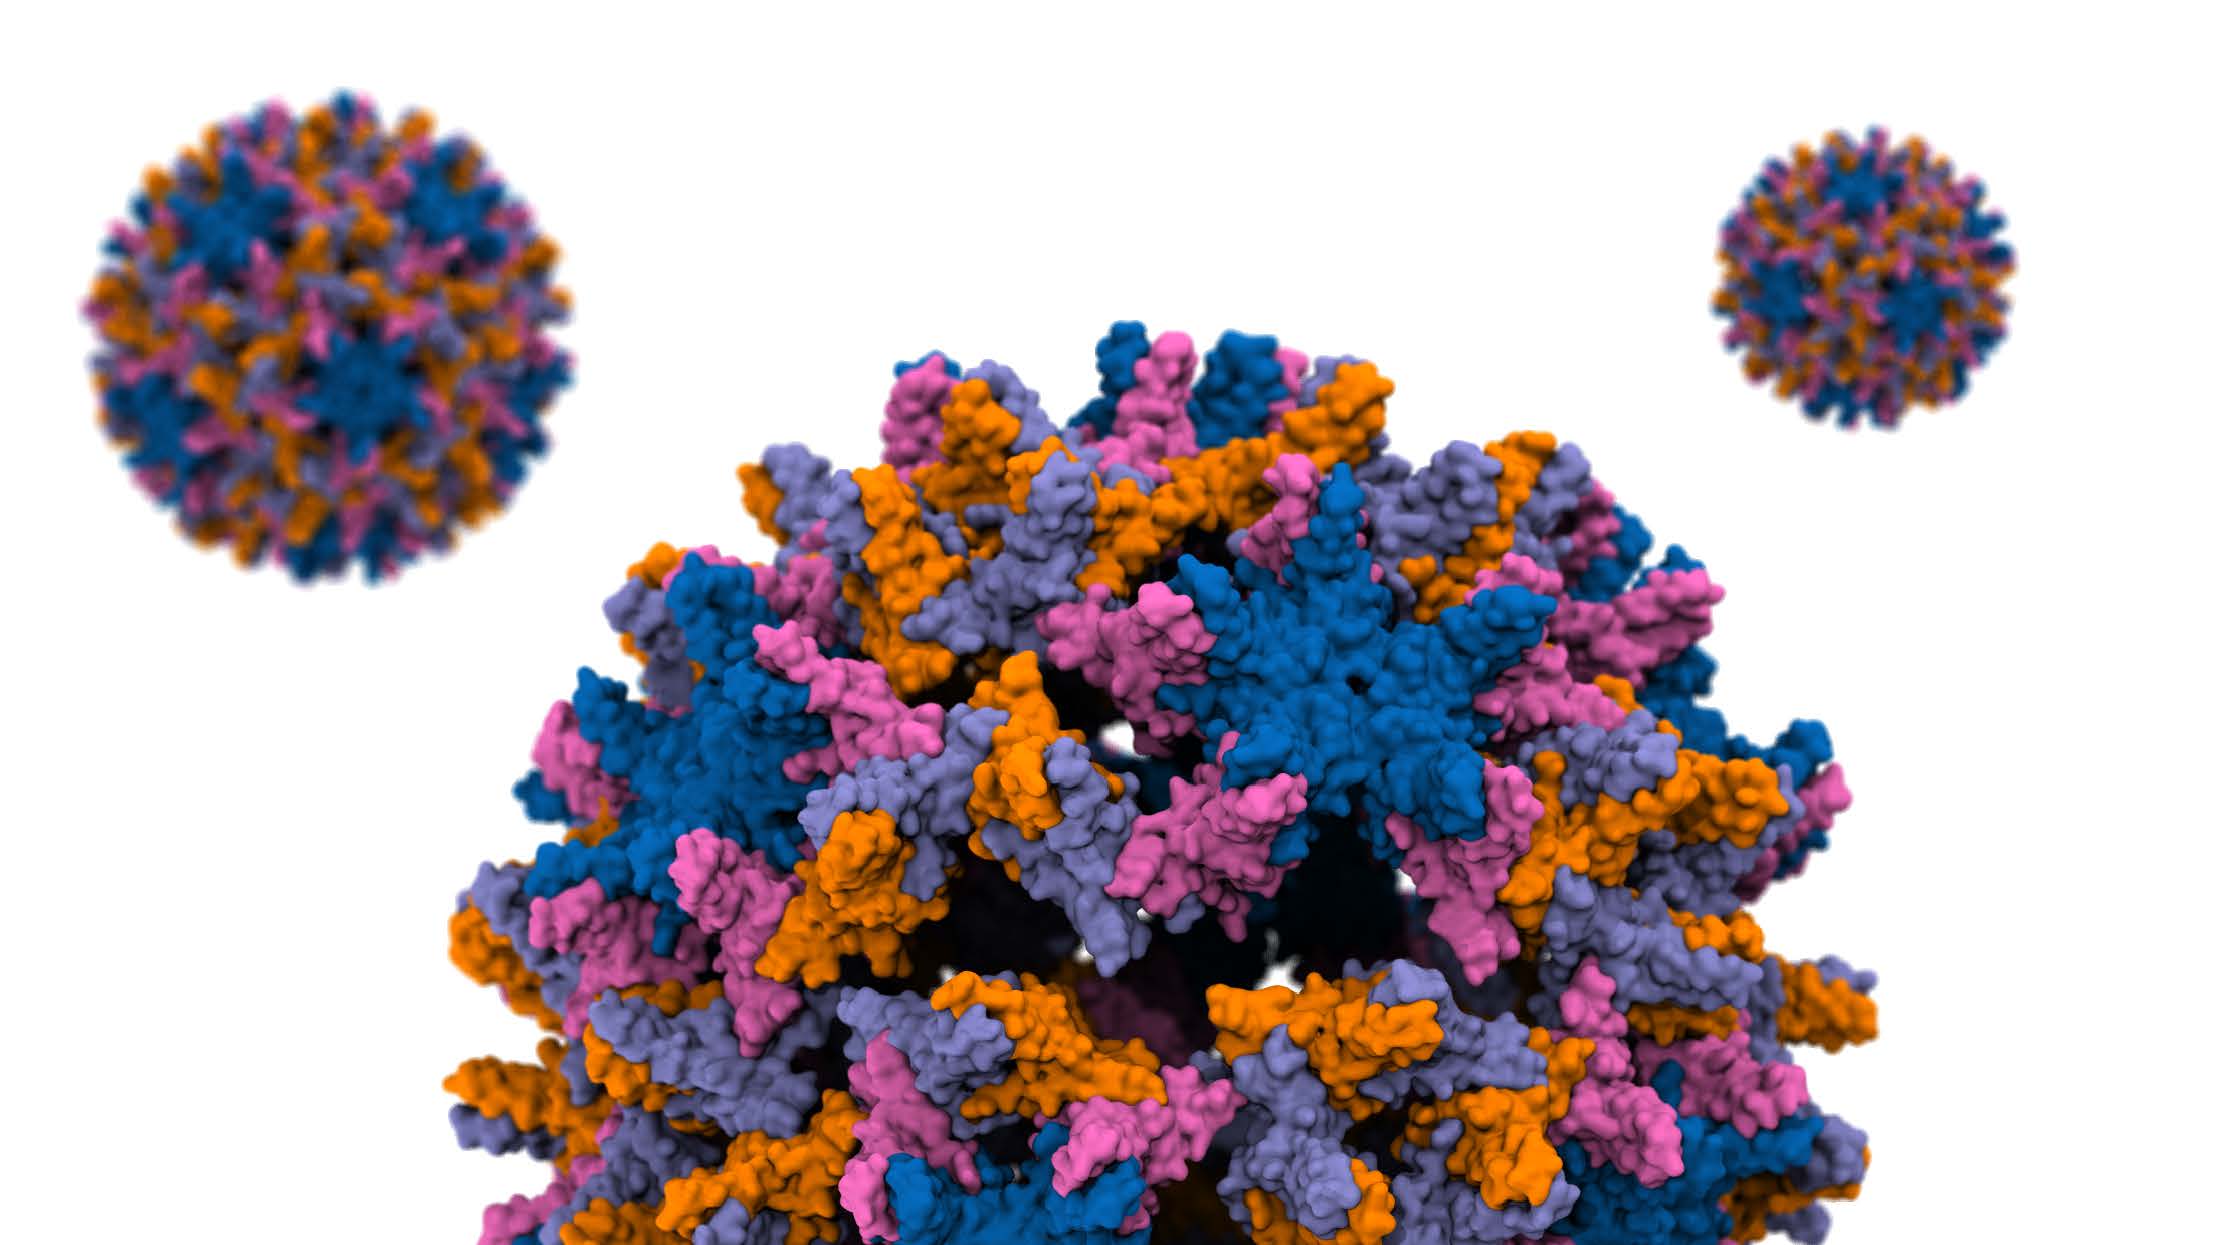 High resolution rendering of a viral capsid